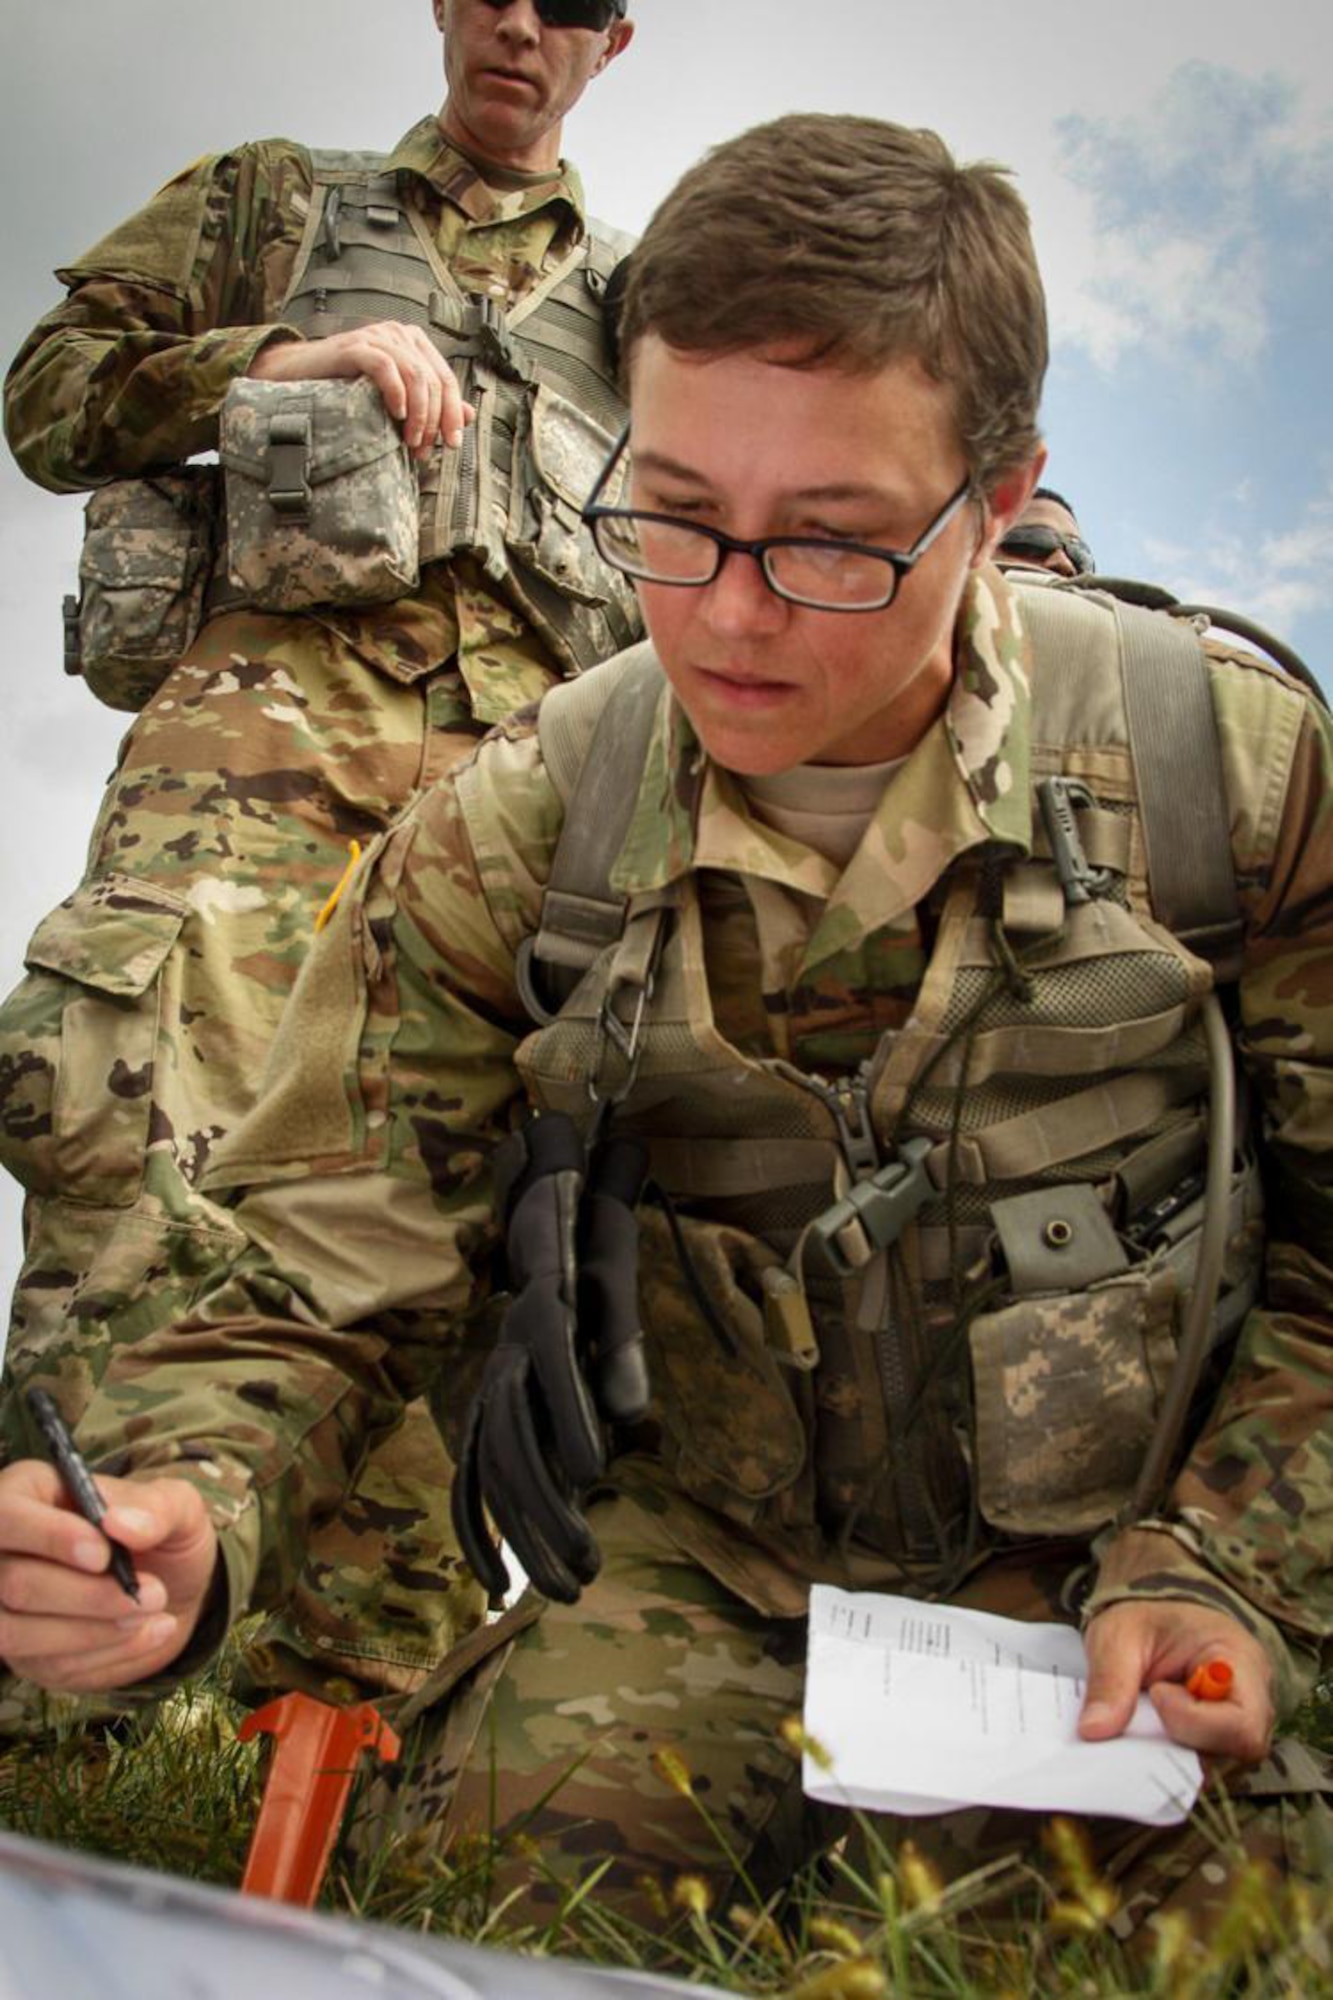 Capt. Emily Lilly conducts a verbally initiated release system (VIRS) exam at Camp Dawson, West Virginia, in 2017. Students successfully guide helicopters into a drop zone and signal for release using hand signals, radio communications and visual guides.